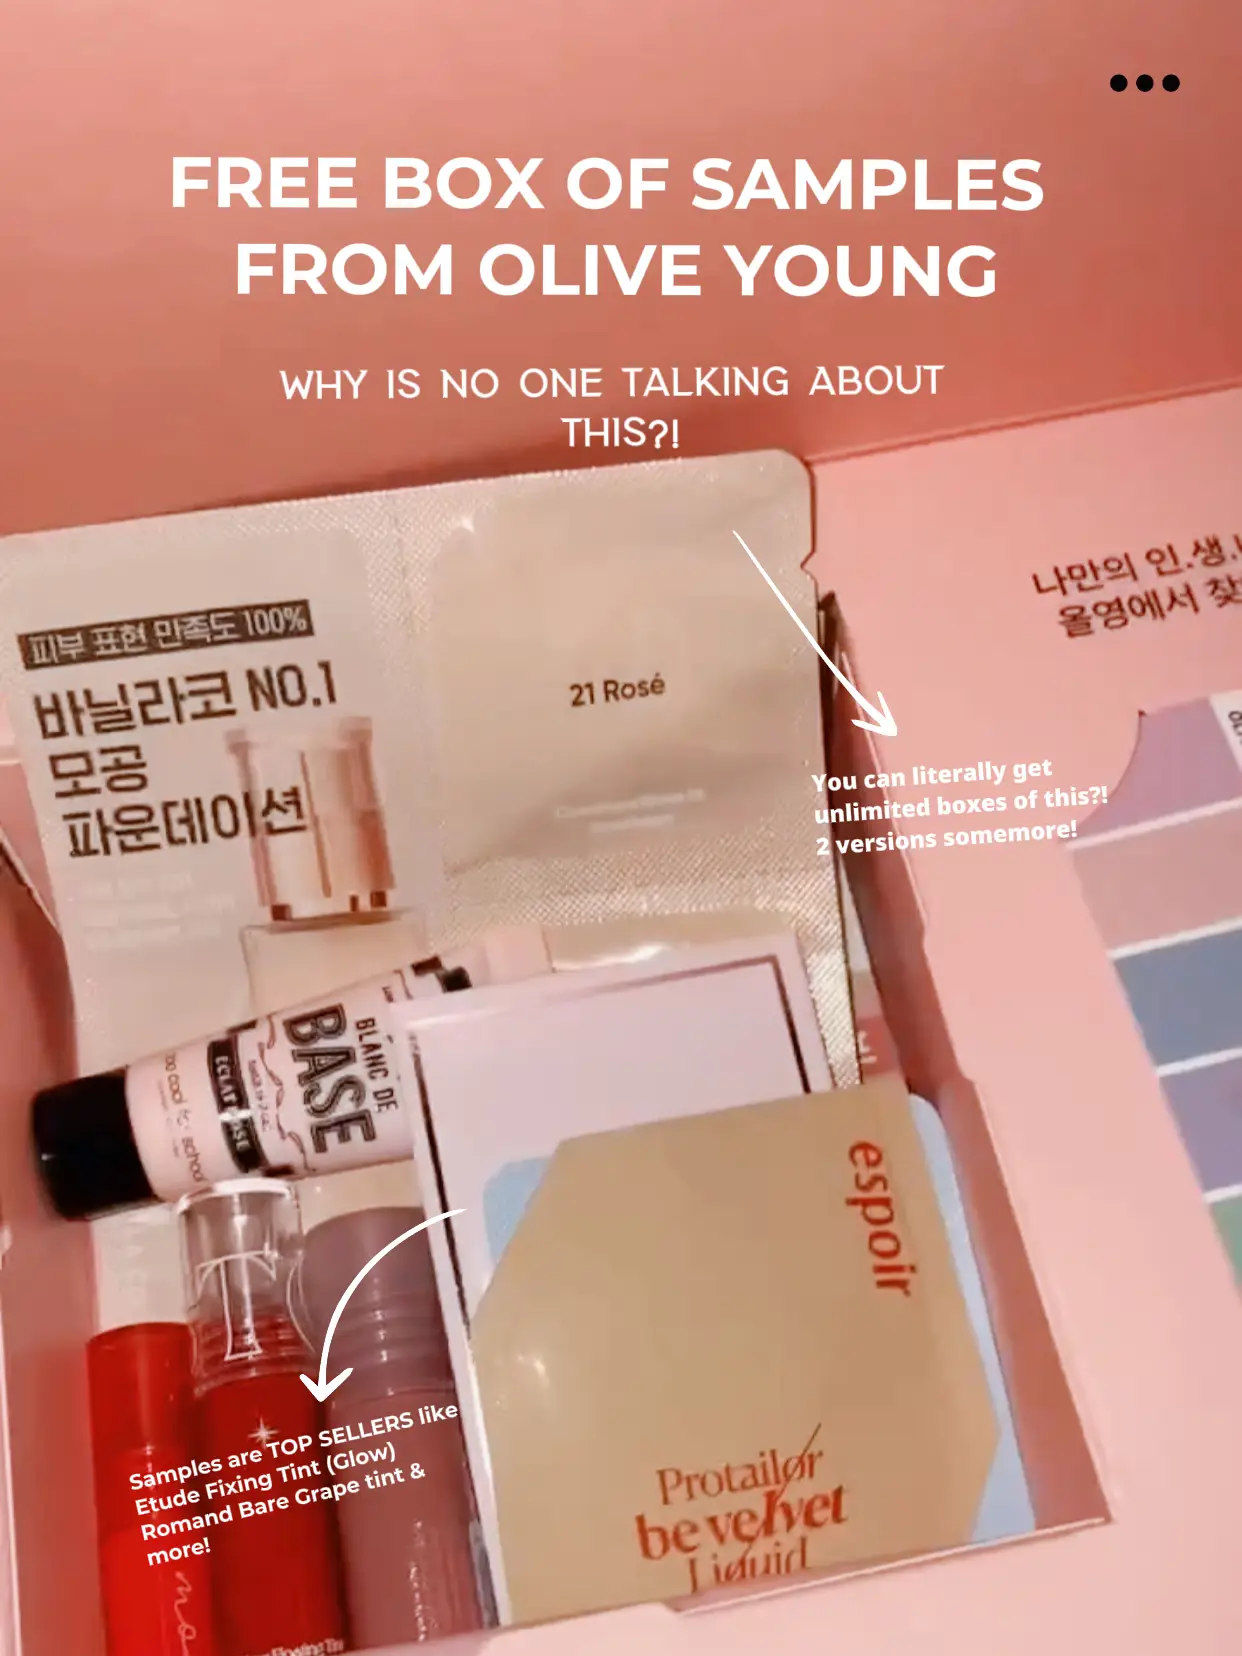 OLIVEYOUNG hidden deal?! FREE MINIs/SAMPLES BOX! 's images(0)